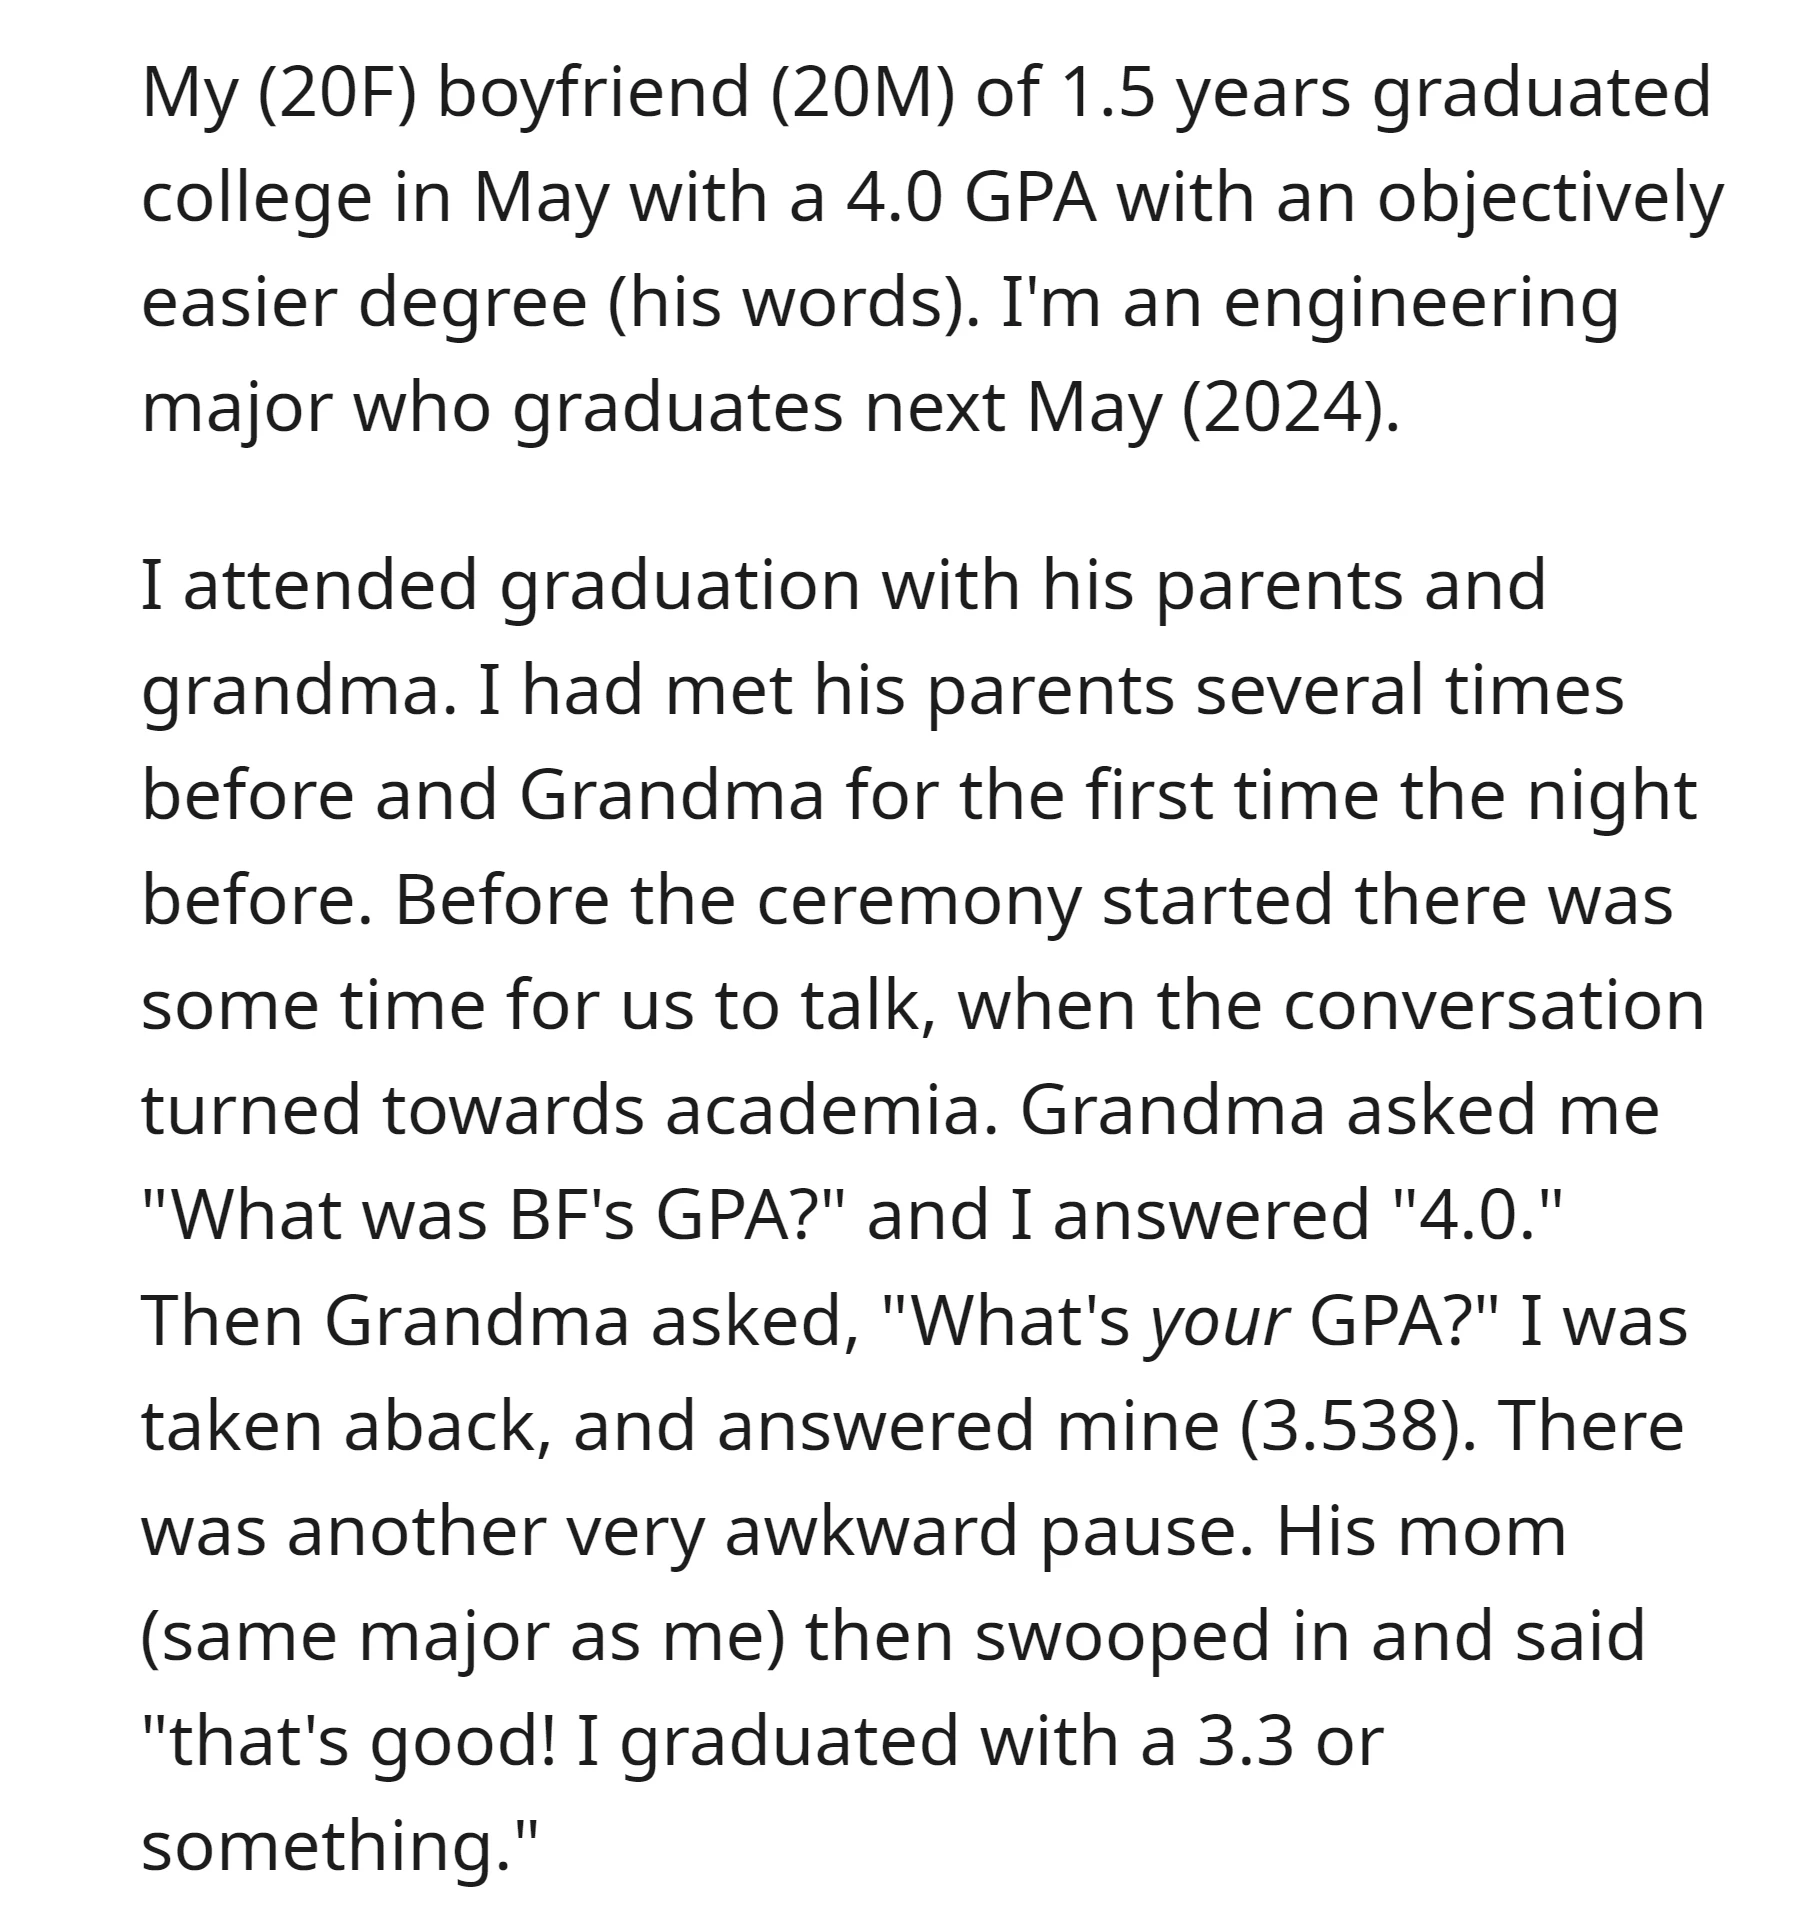 OP attended her boyfriend's graduation with a 4.0 GPA, suddently his grandma asked her GPA